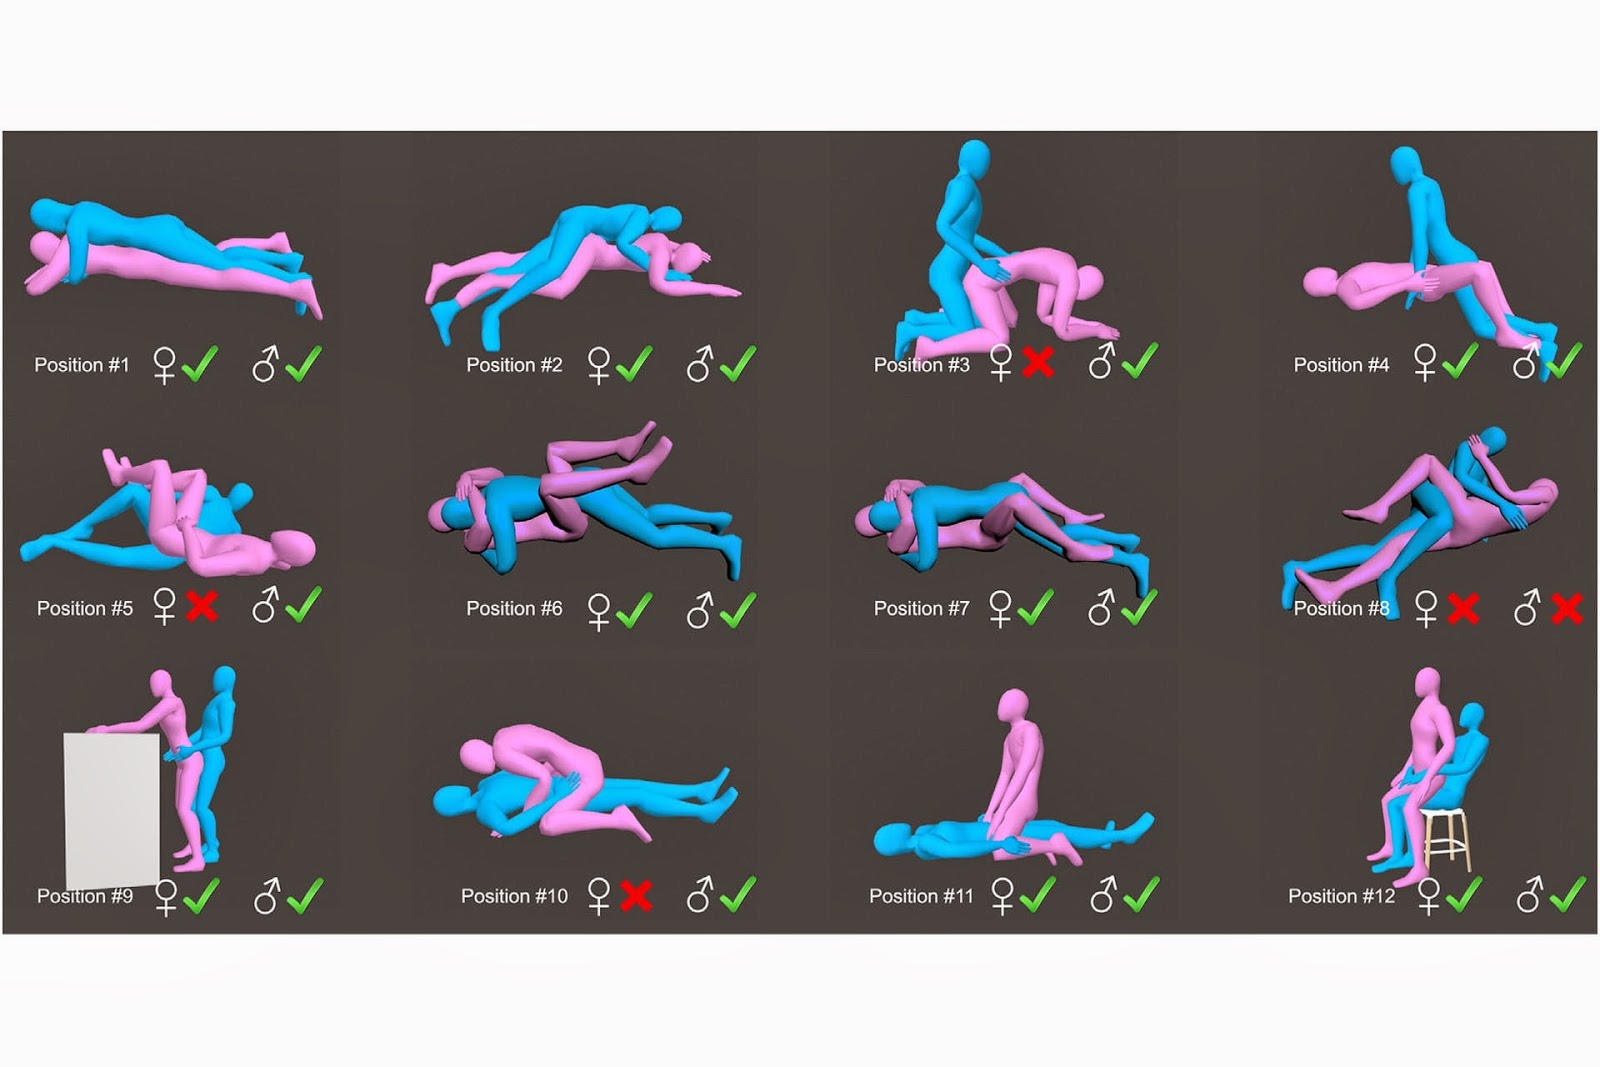 http://www.wired.co.uk/news/archive/2013-11/26/hip-sexual-positions